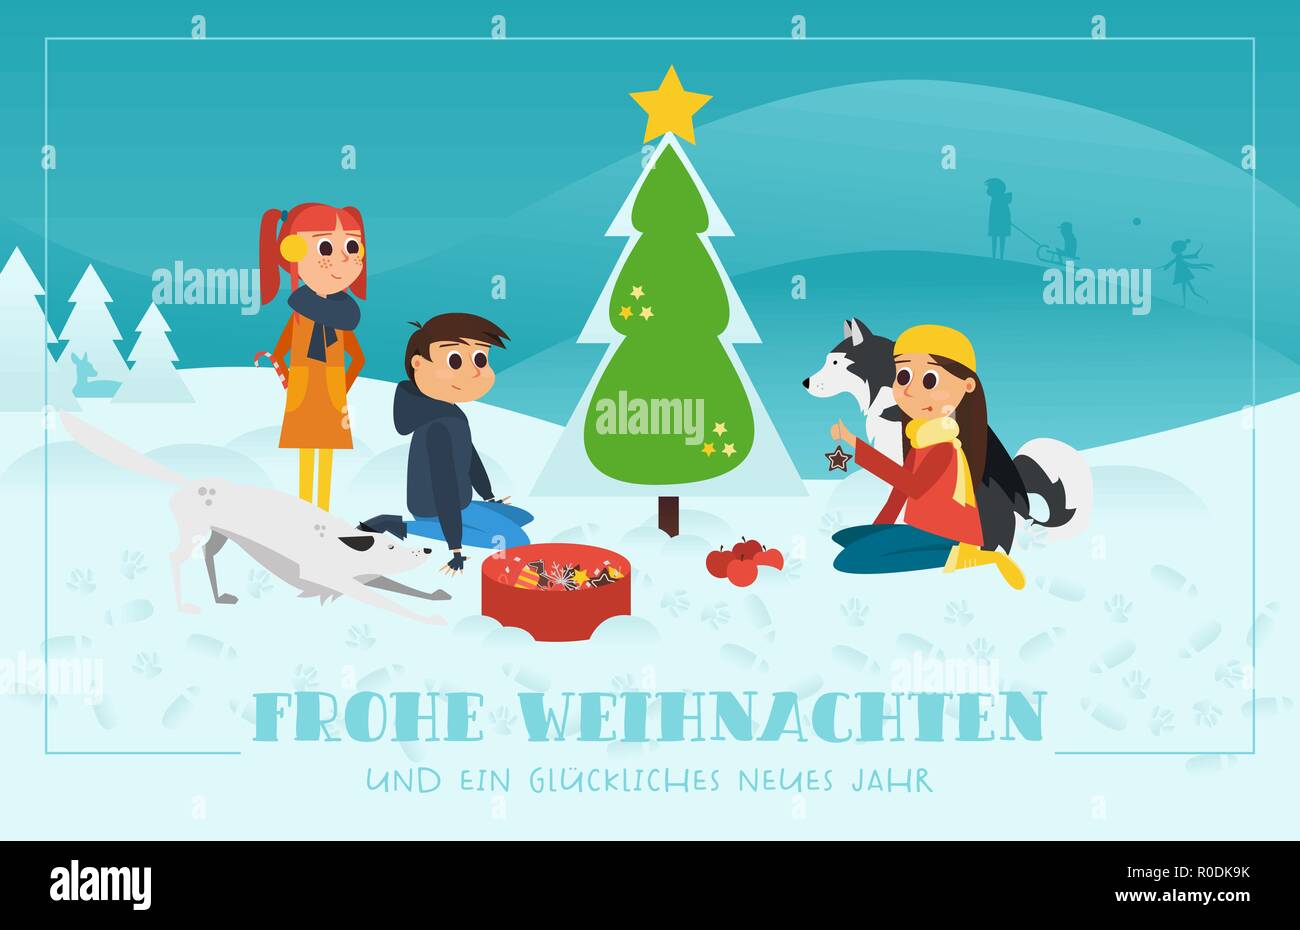 Christmas Greeting Card: Children with Dogs Decorating the Chrismas Tree in Snowy Landscape. Stock Vector